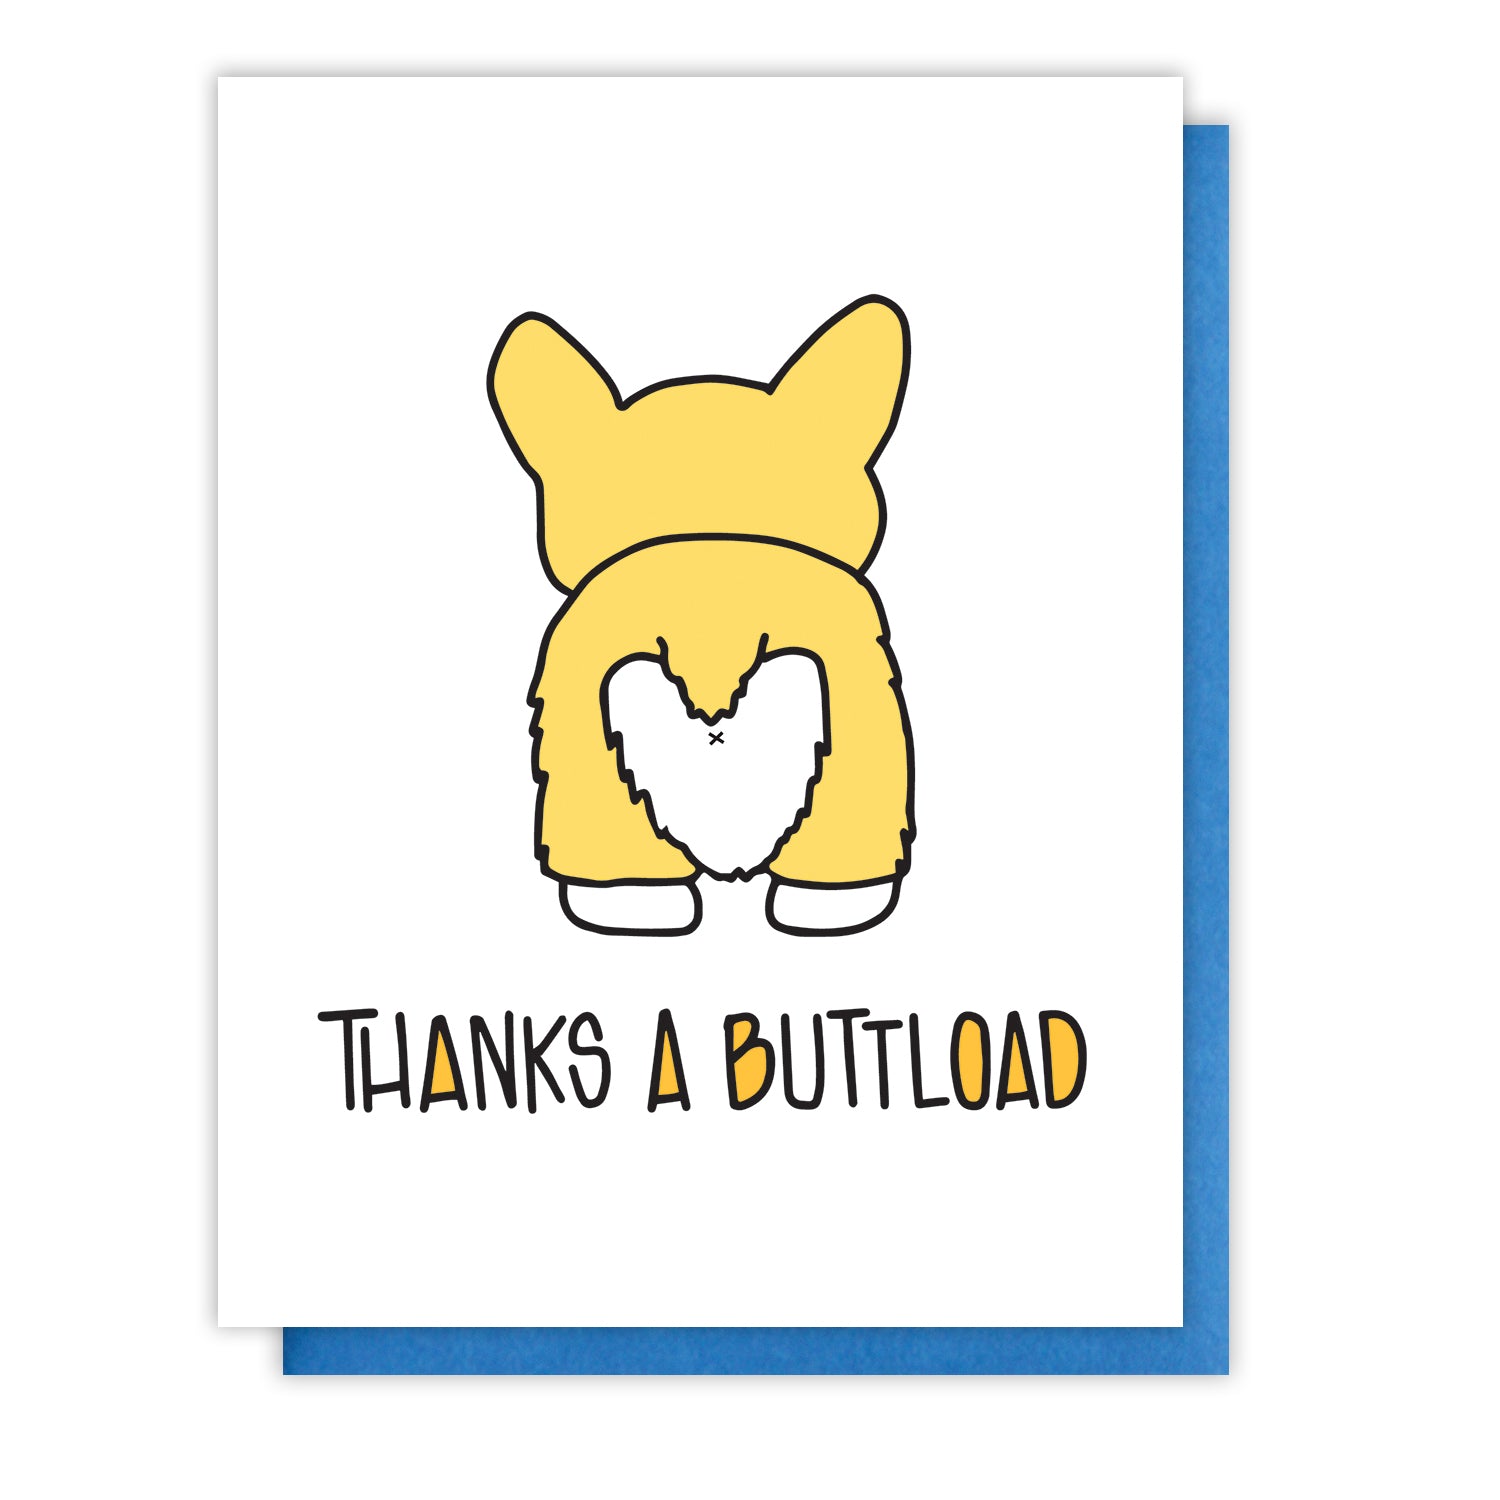 Thanks a Buttload | Corgi Dog Butt | Funny Thank You Letterpress Card | kiss and punch Los Angeles California